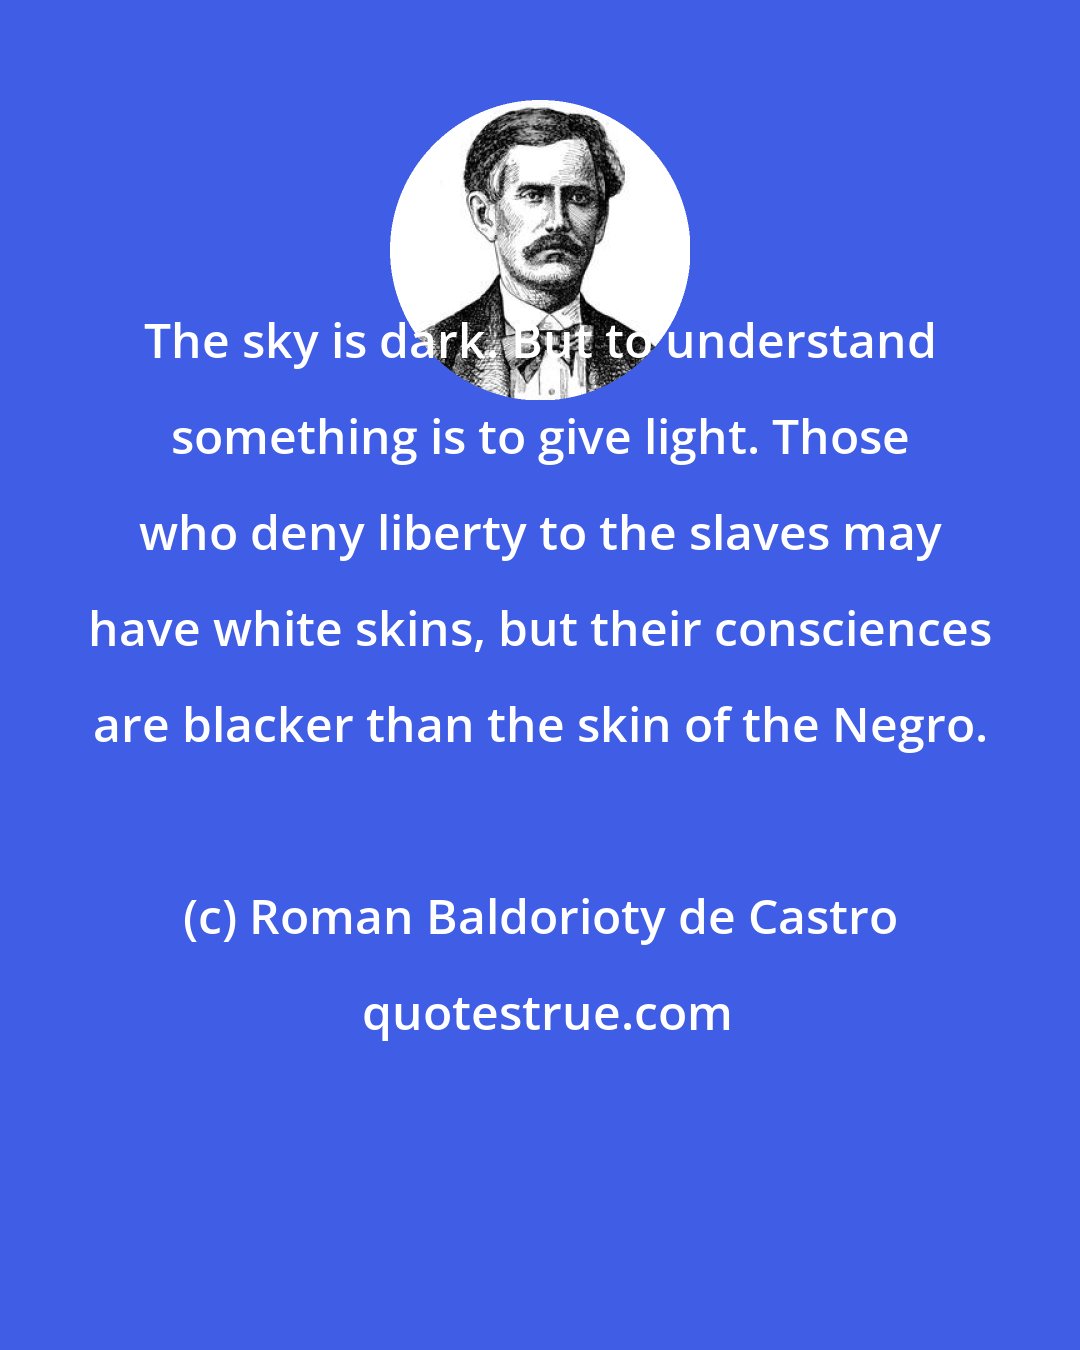 Roman Baldorioty de Castro: The sky is dark. But to understand something is to give light. Those who deny liberty to the slaves may have white skins, but their consciences are blacker than the skin of the Negro.